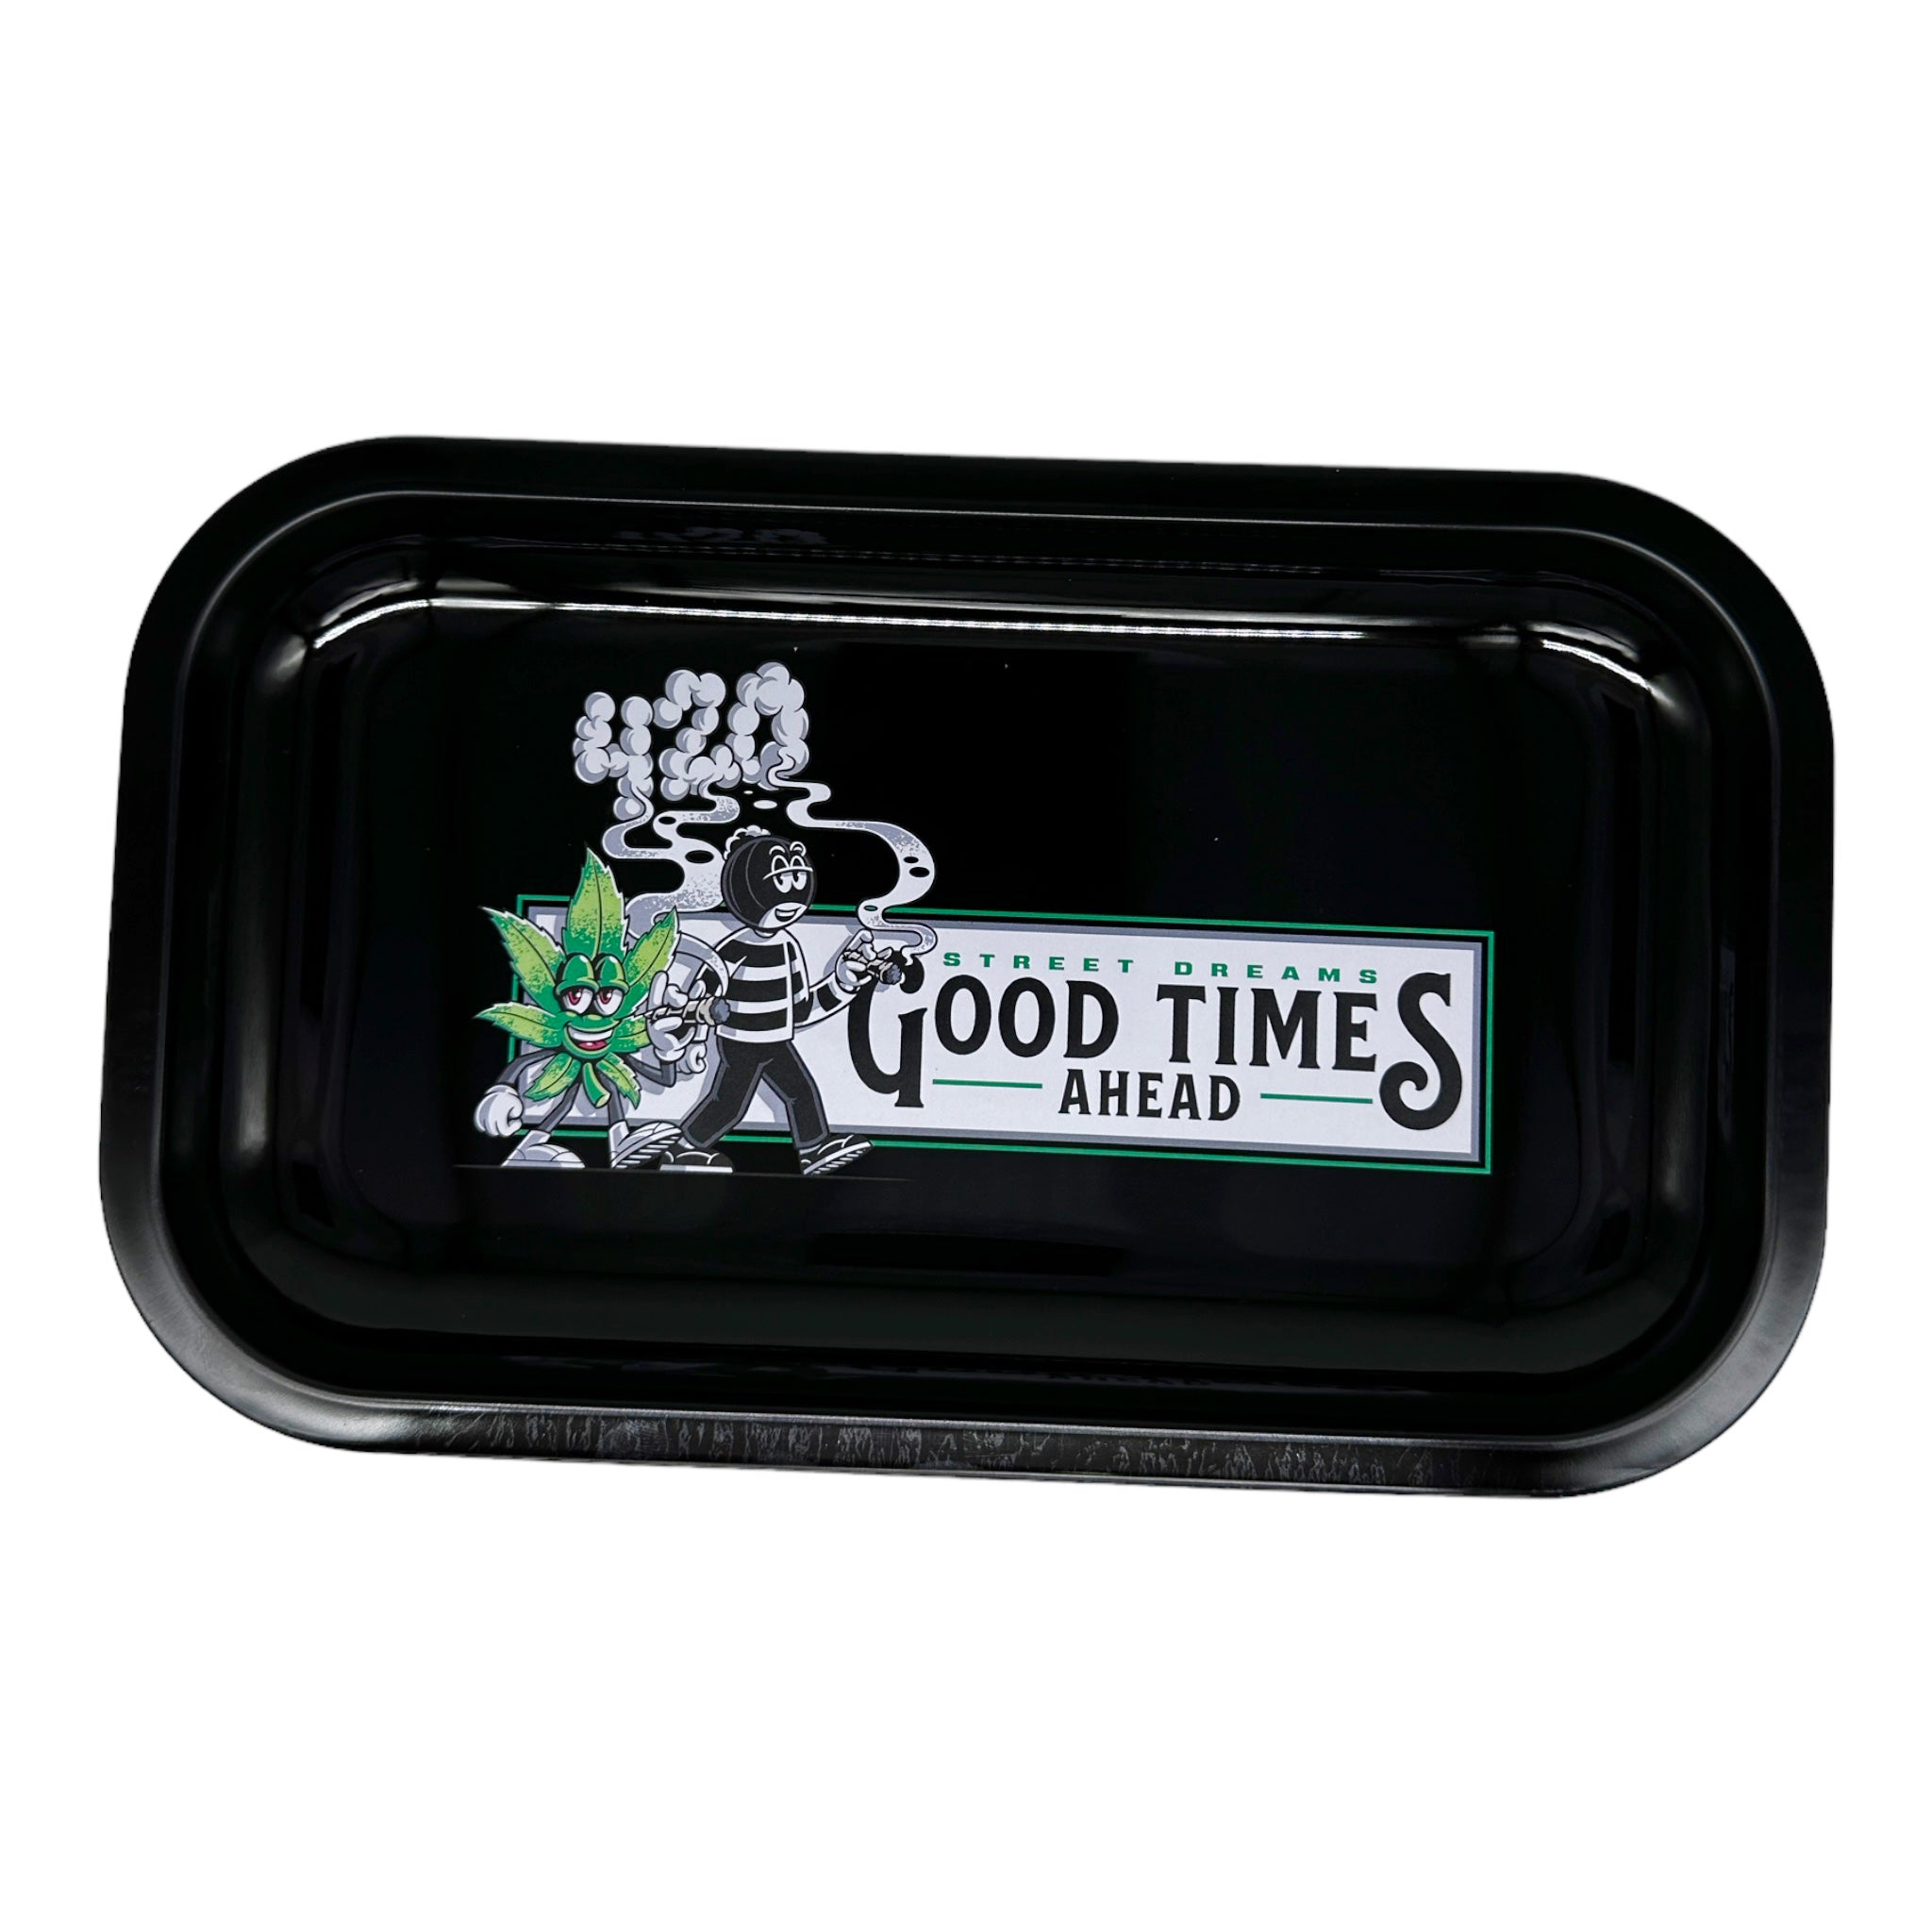 Good Times Gold Dream Rolling Tray